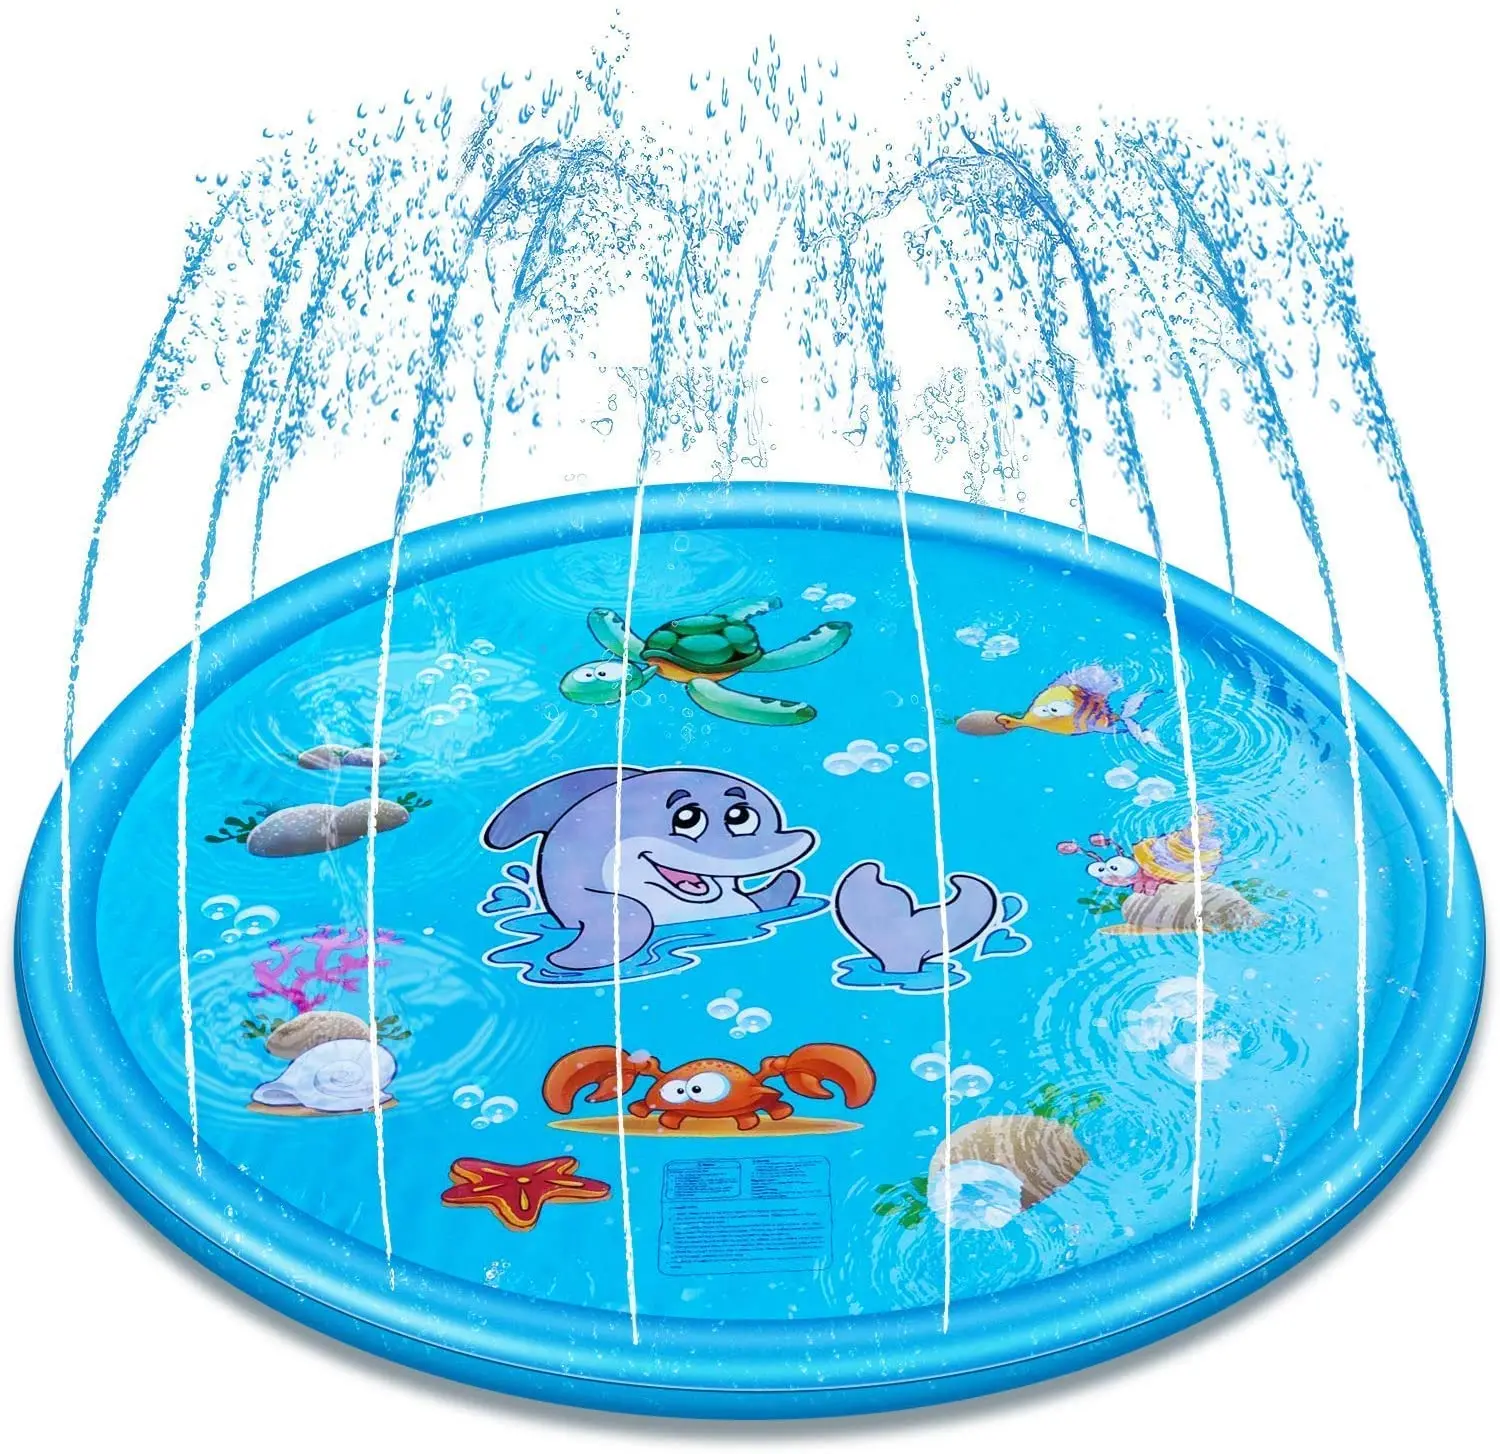 

Splash Play Mat Large Size Inflatable Sprinkler Pad for Kids Toddlers Summer Outdoor Water Toys Wading Pool Fun Backyard Play Ma, Colorful